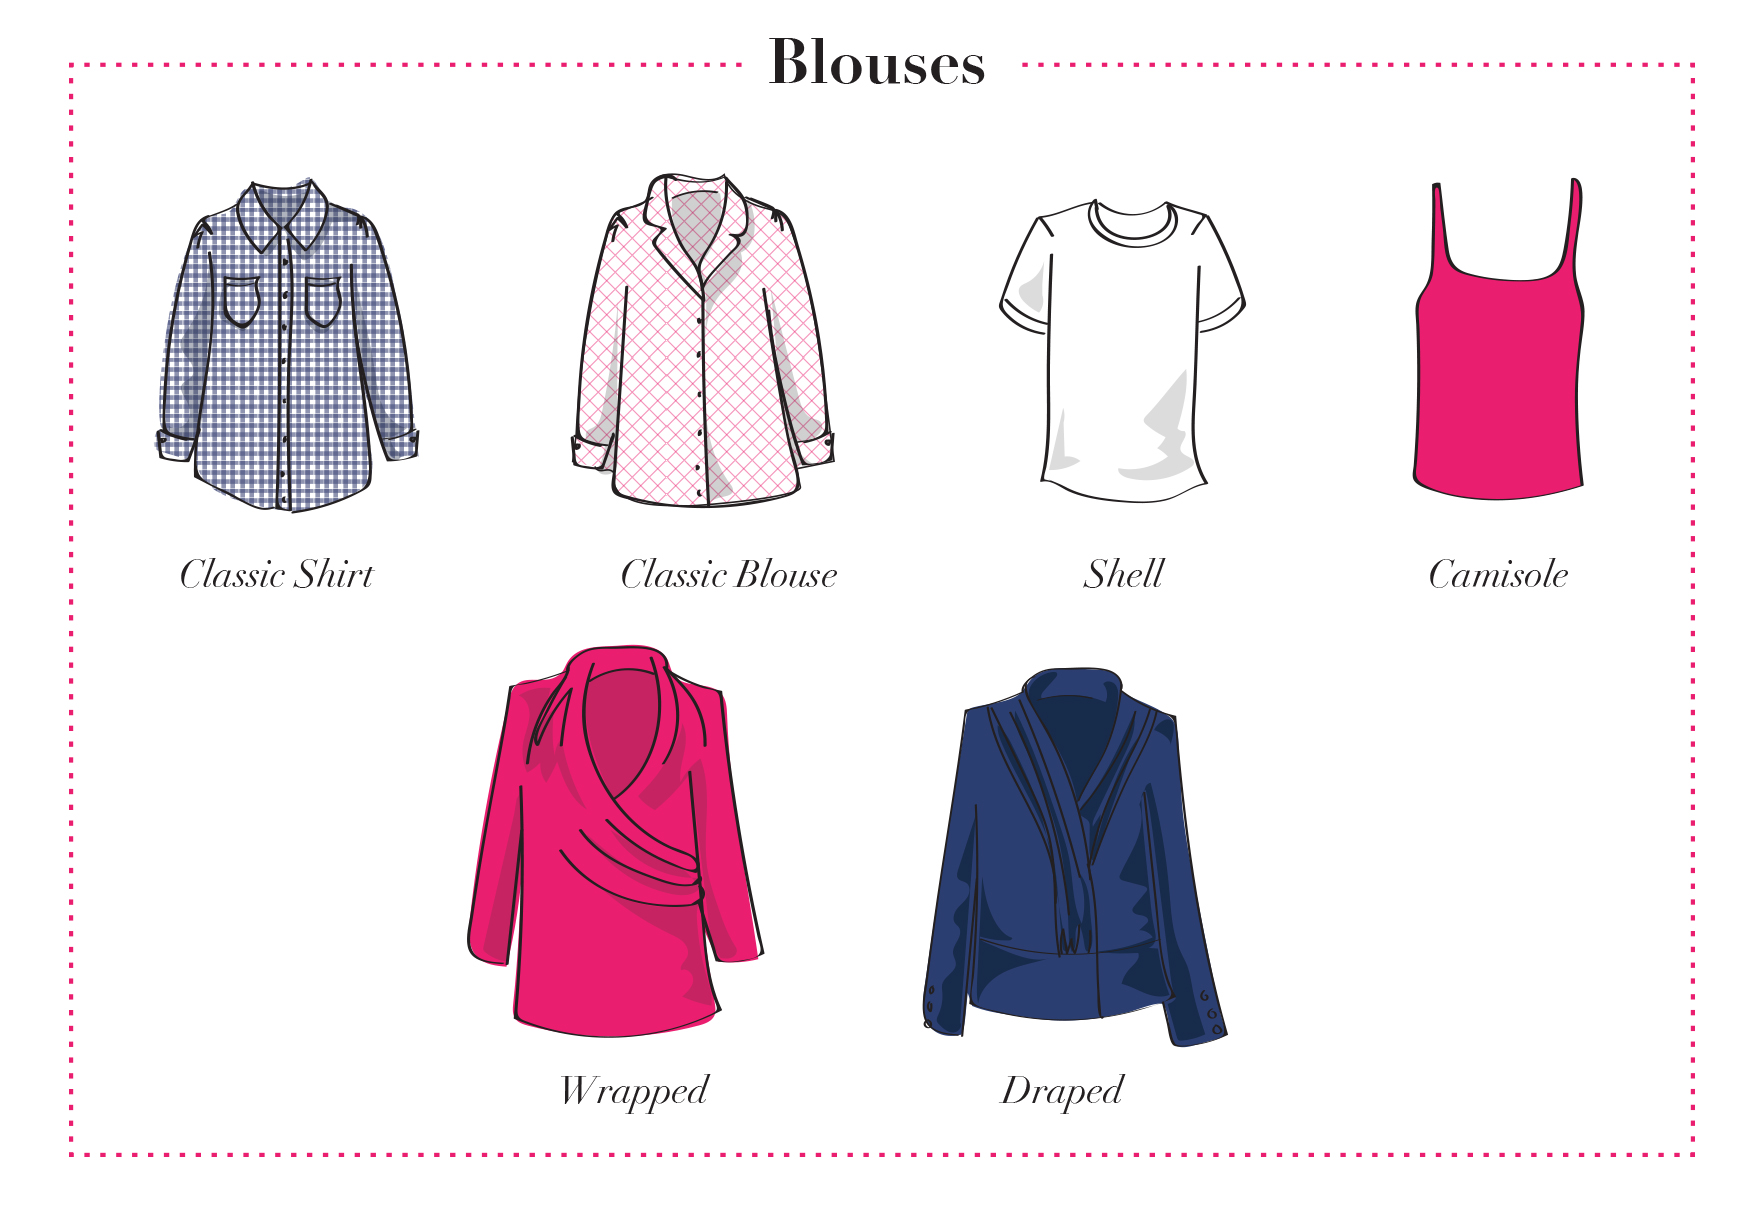 Shirts and Blouses